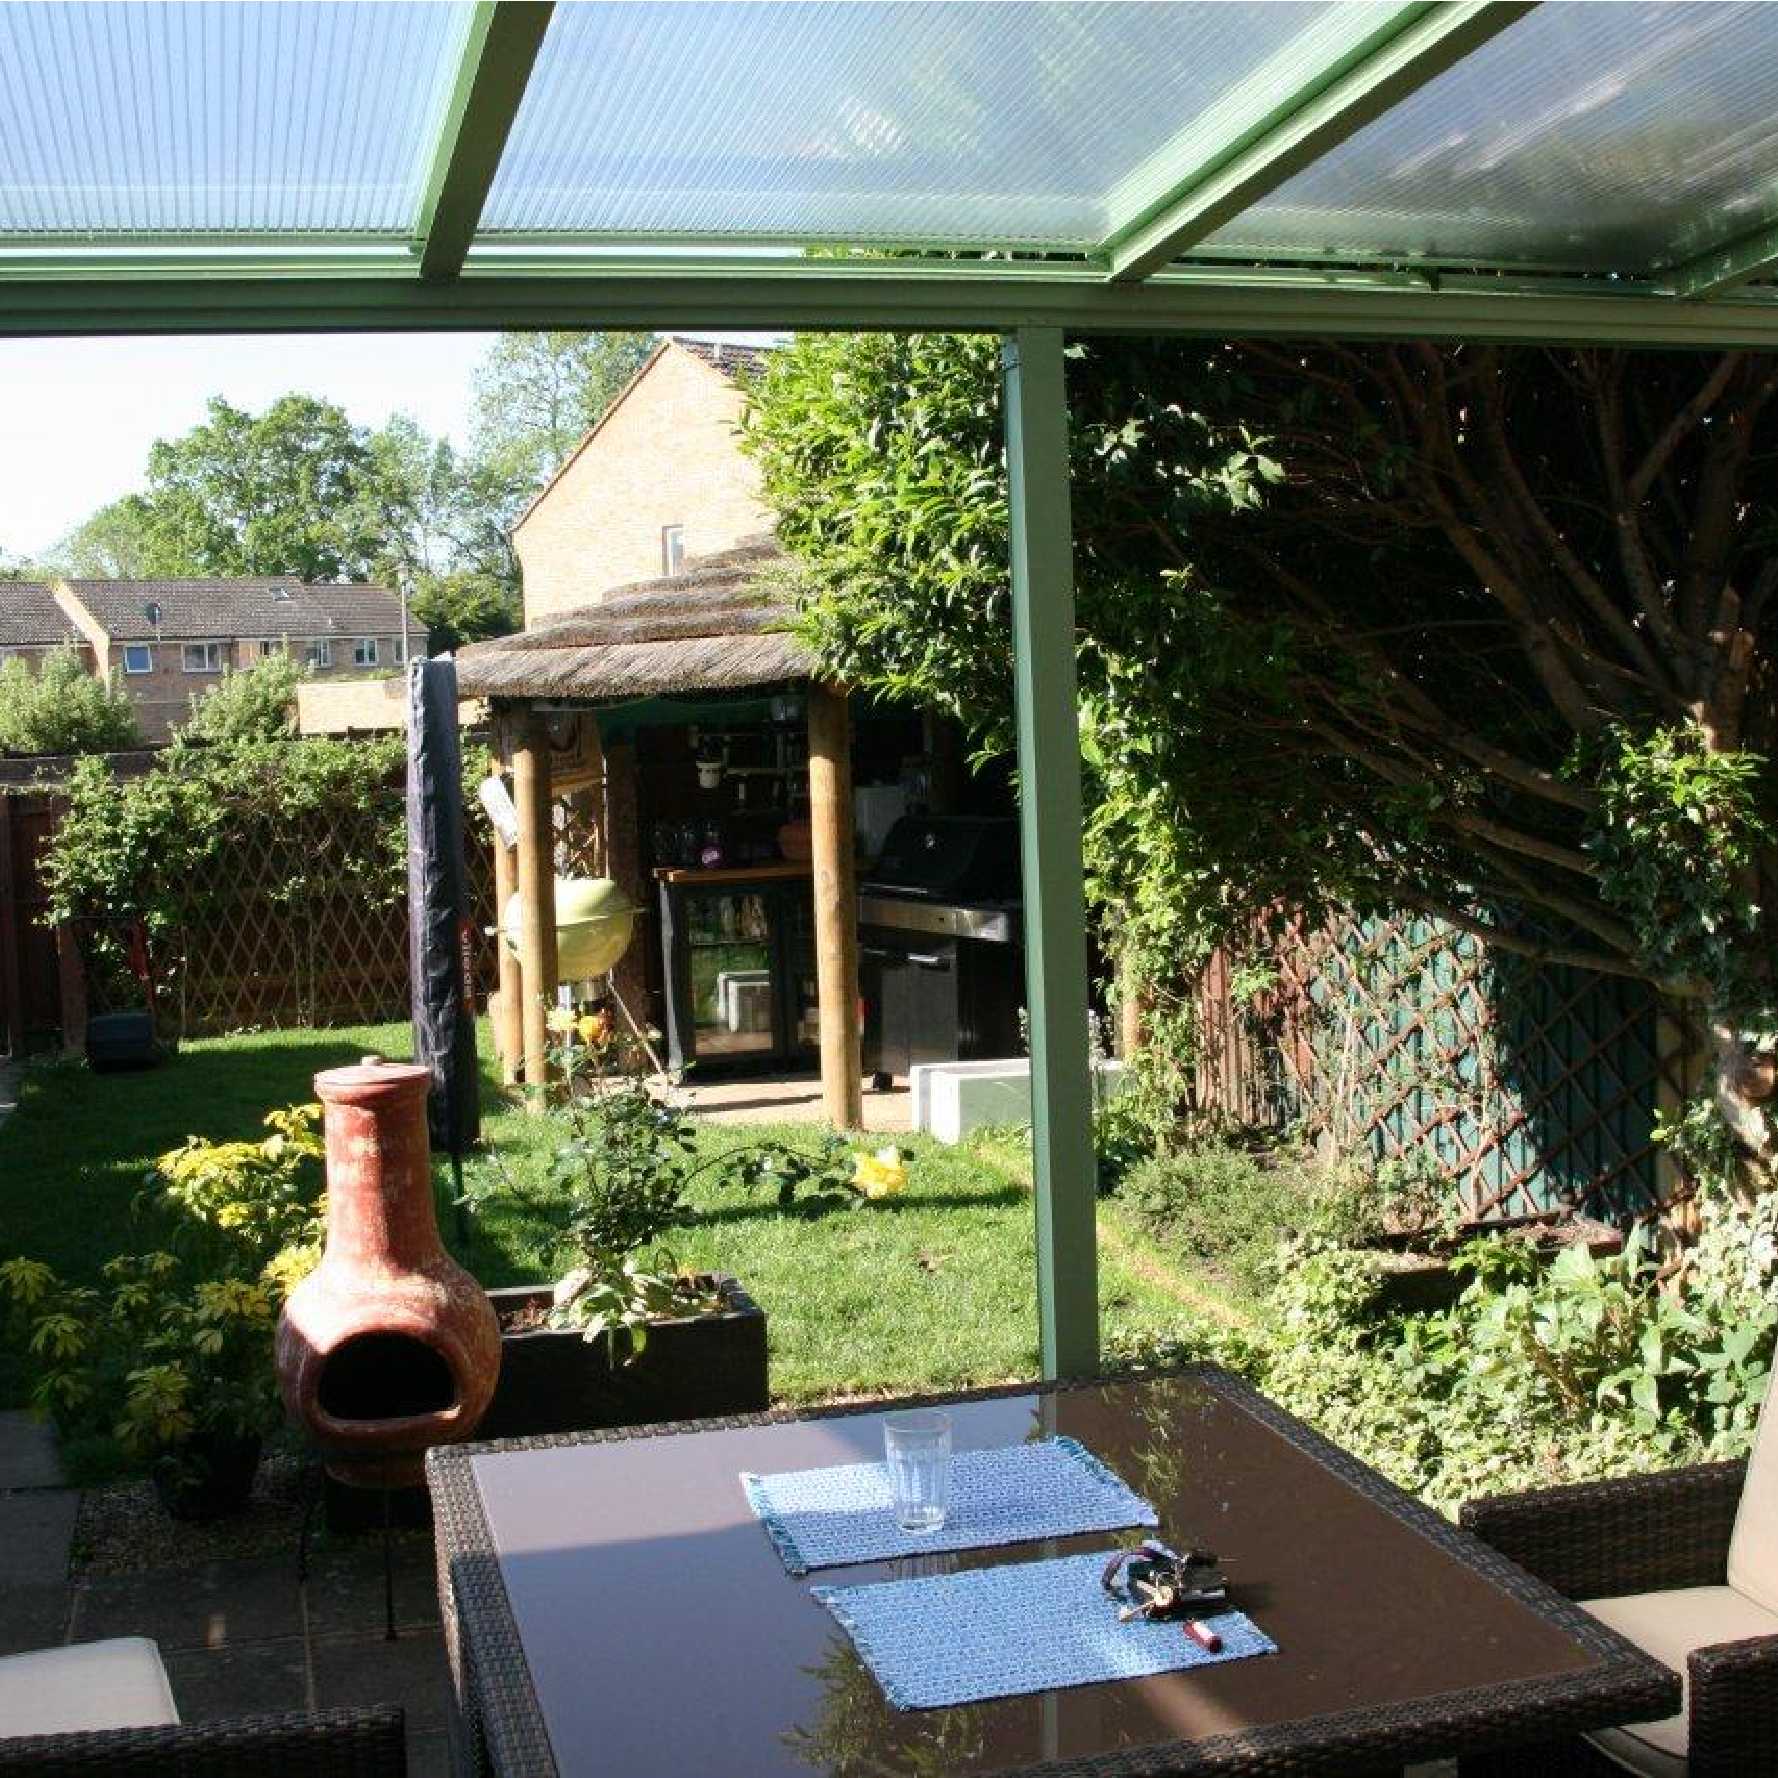 Affordable Omega Smart Lean-To Canopy, White with 16mm Polycarbonate Glazing - 11.4m (W) x 4.0m (P), (5) Supporting Posts